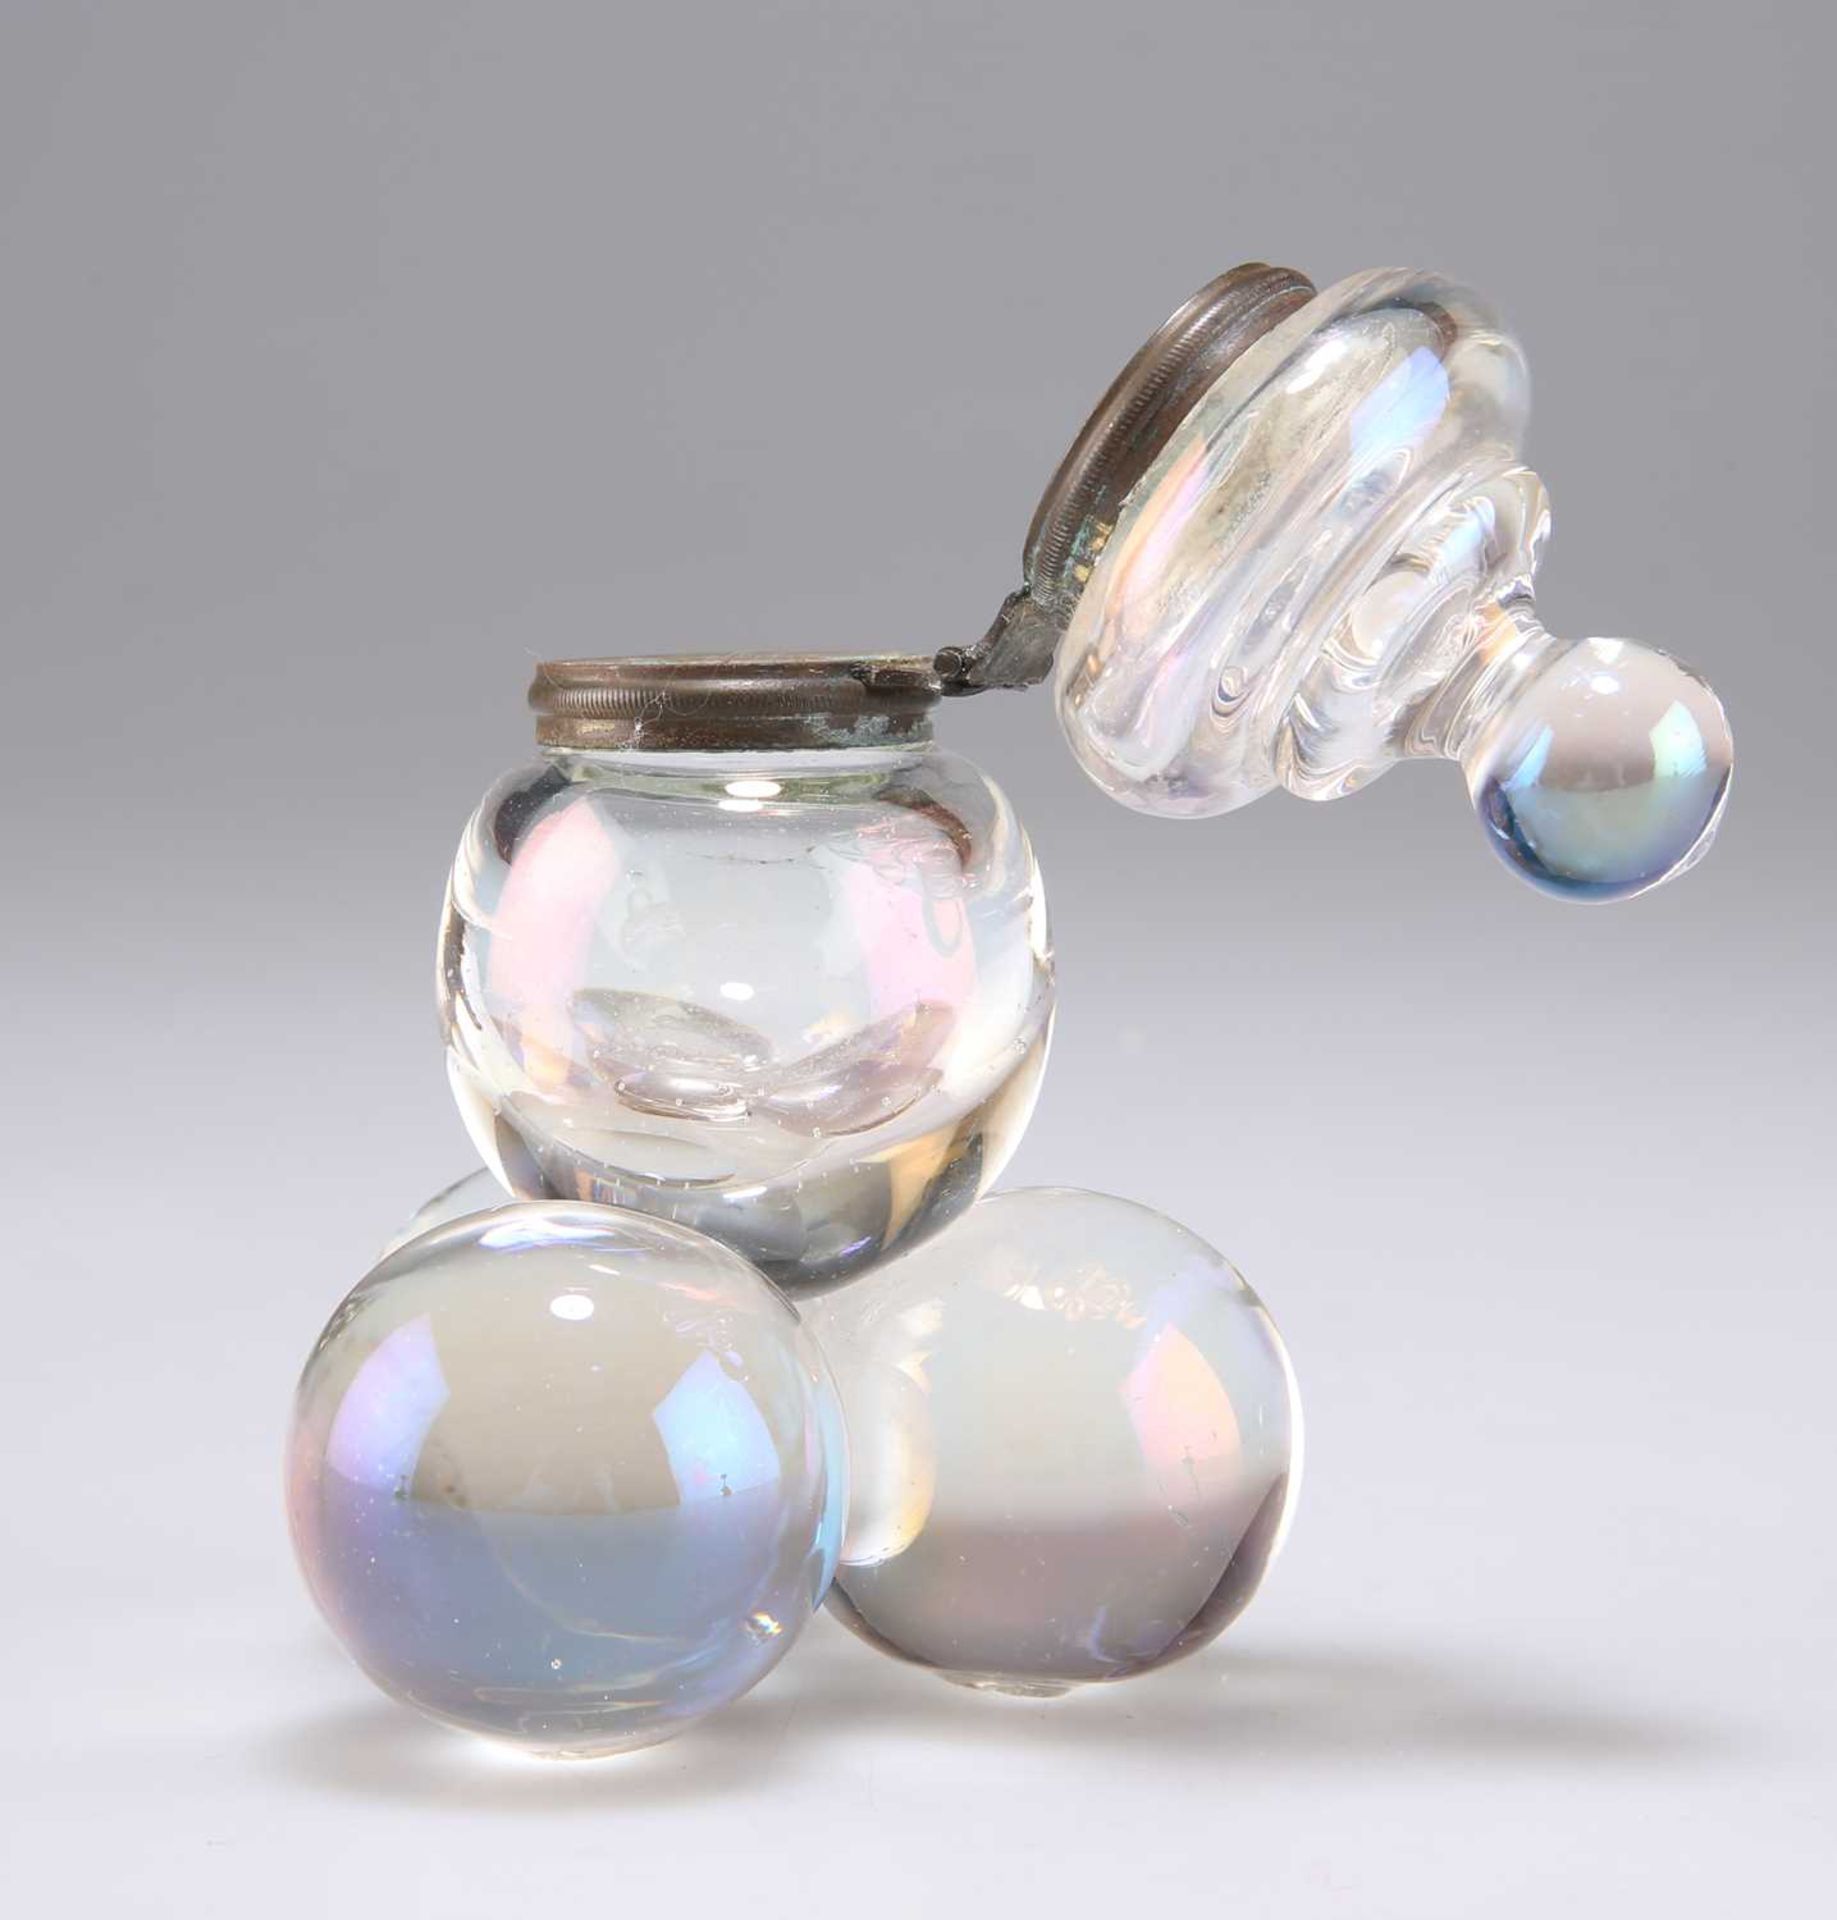 A HARRACH 'SOAP BUBBLES' GLASS INKWELL, LATE 19TH CENTURY